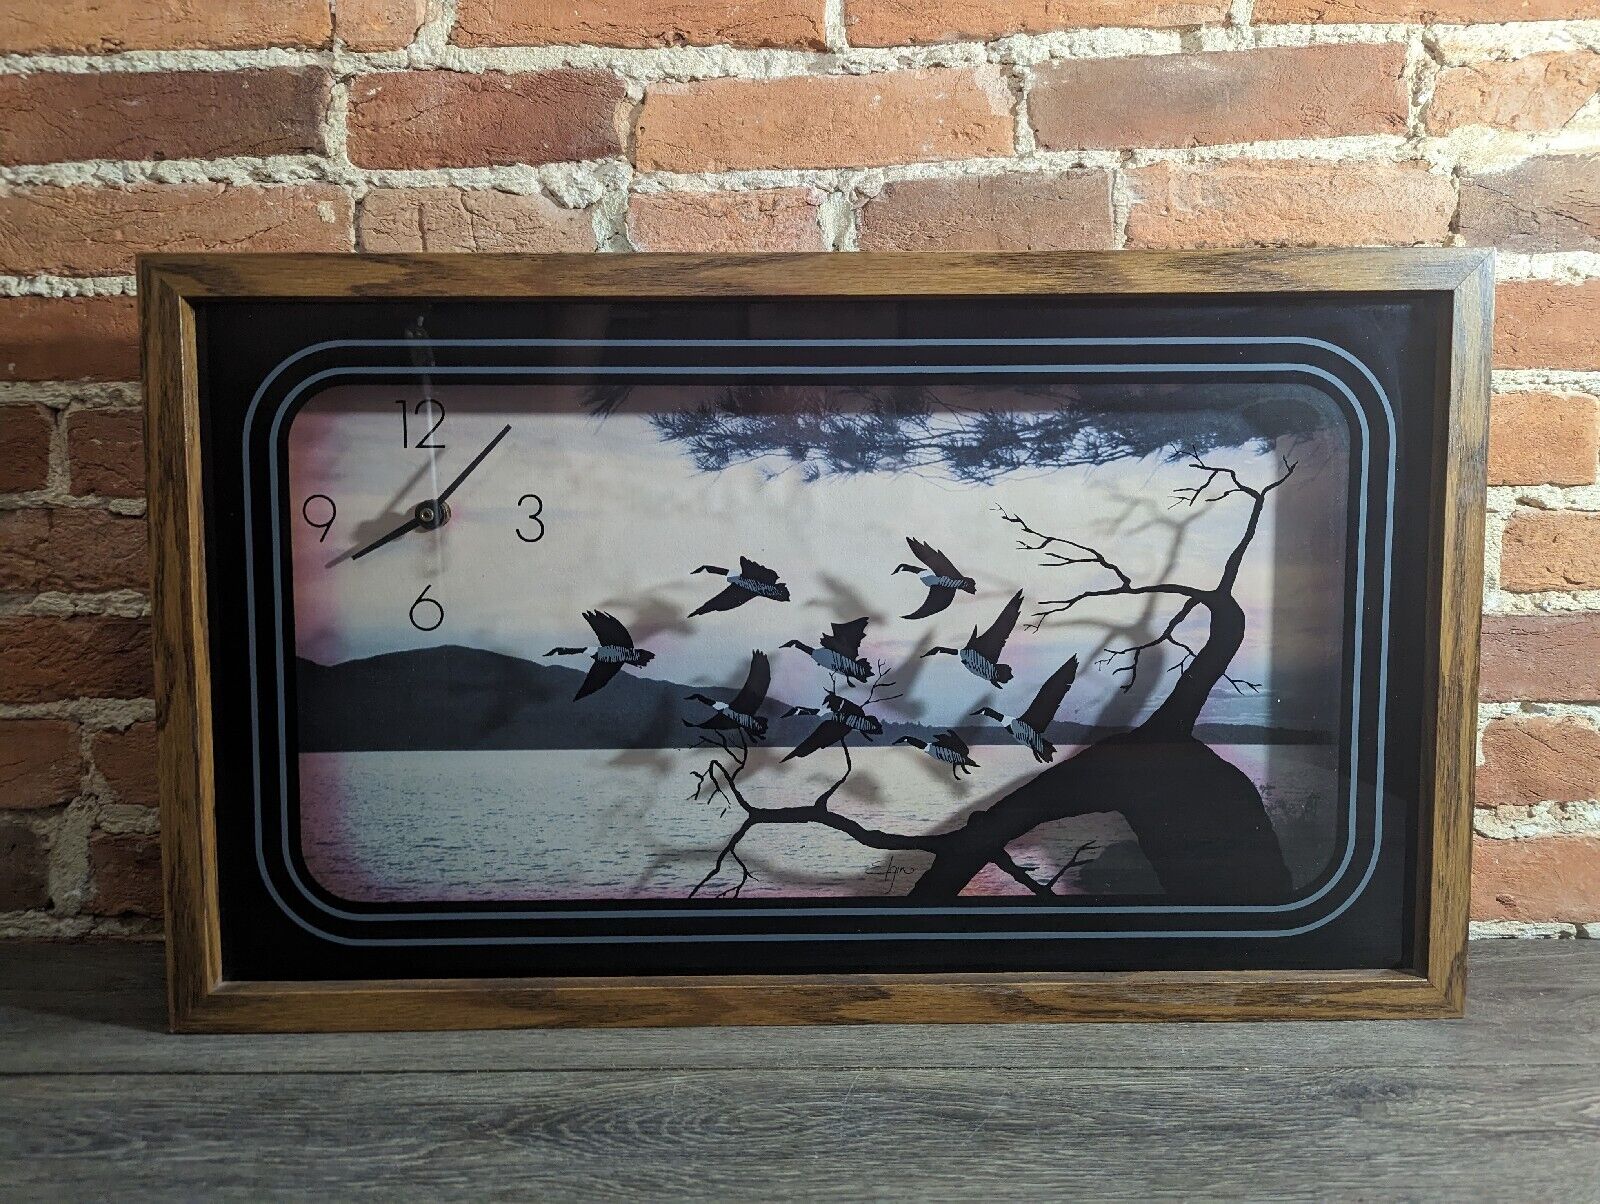 Vintage Elgin Welby Shadow Box Wall Clock with Geese 1976 Version 